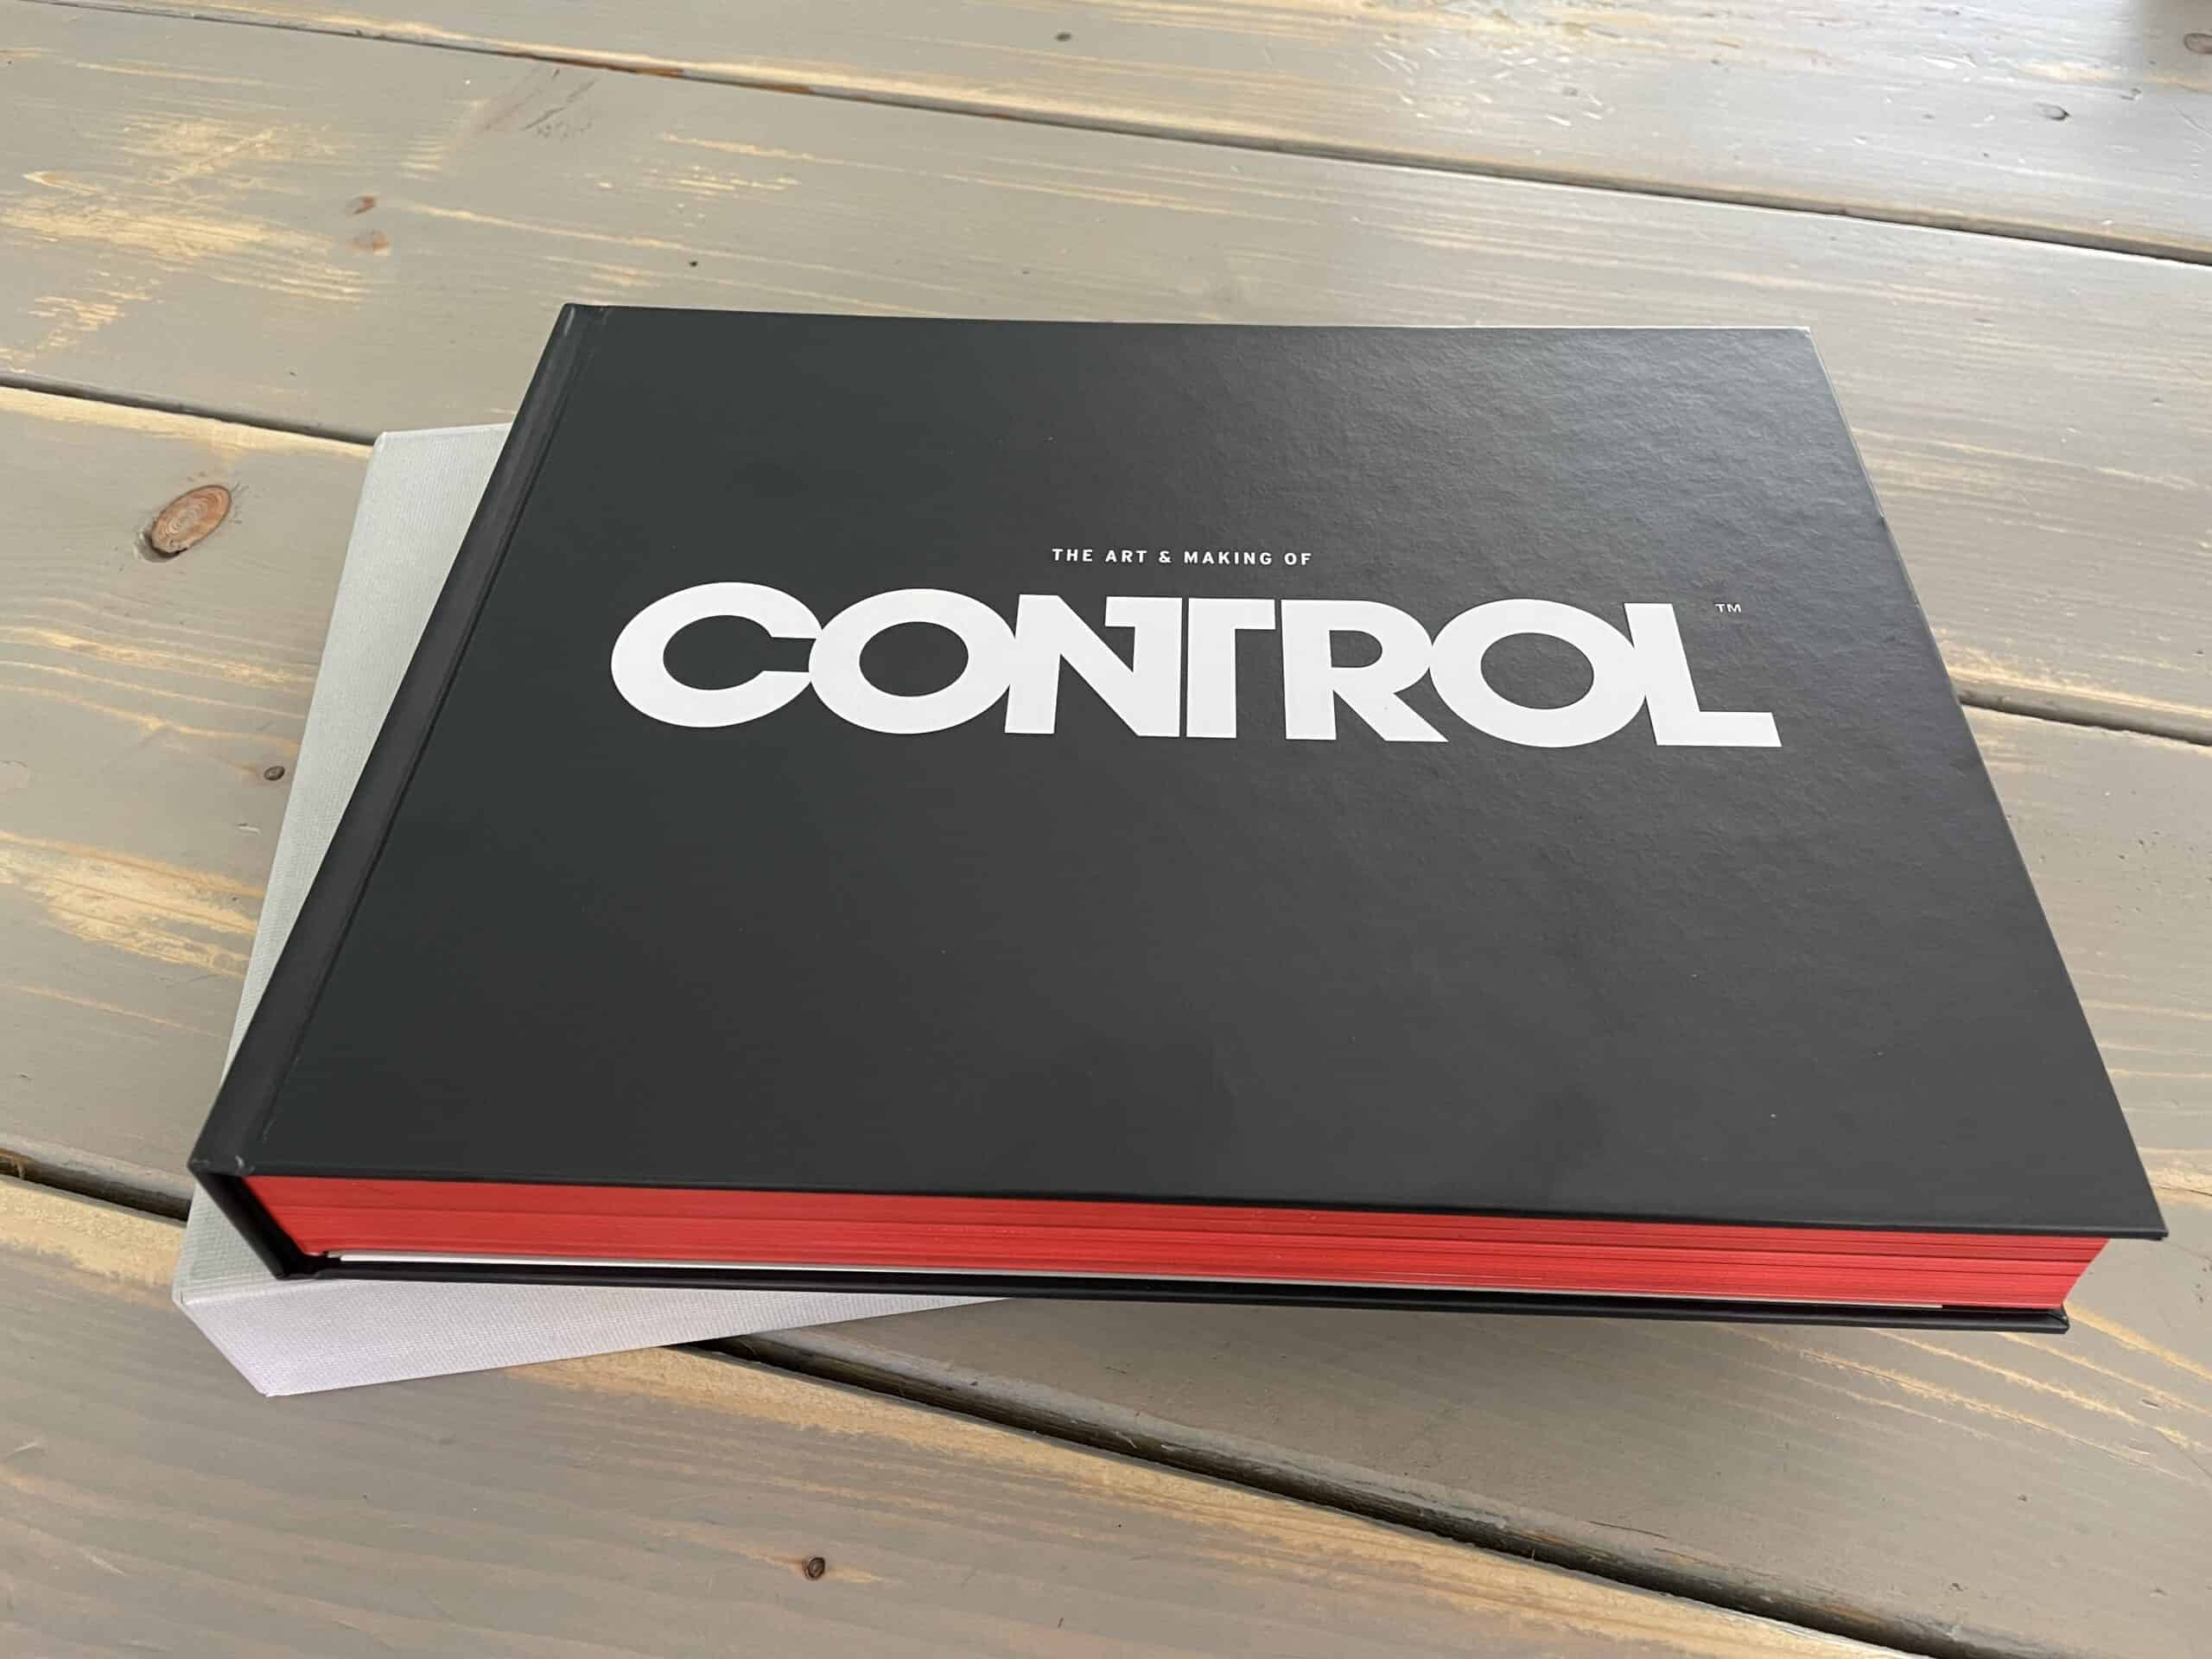 The Art & Making of Control